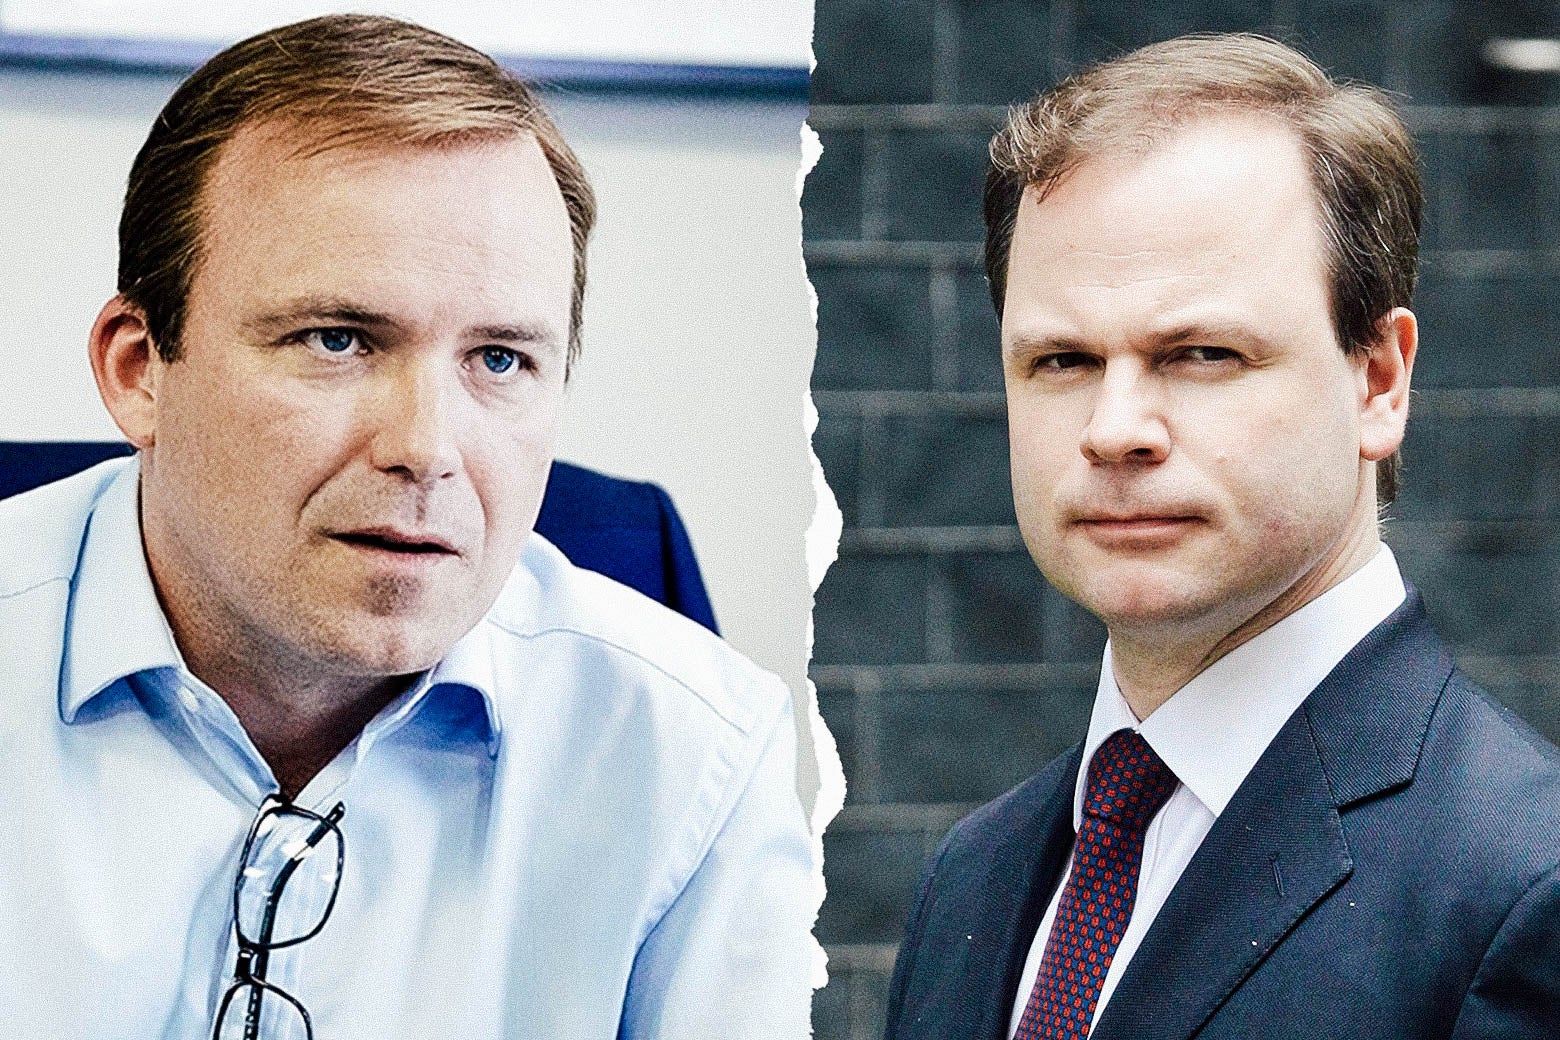 Rory Kinnear as Craig Oliver, and the real Craig Oliver.